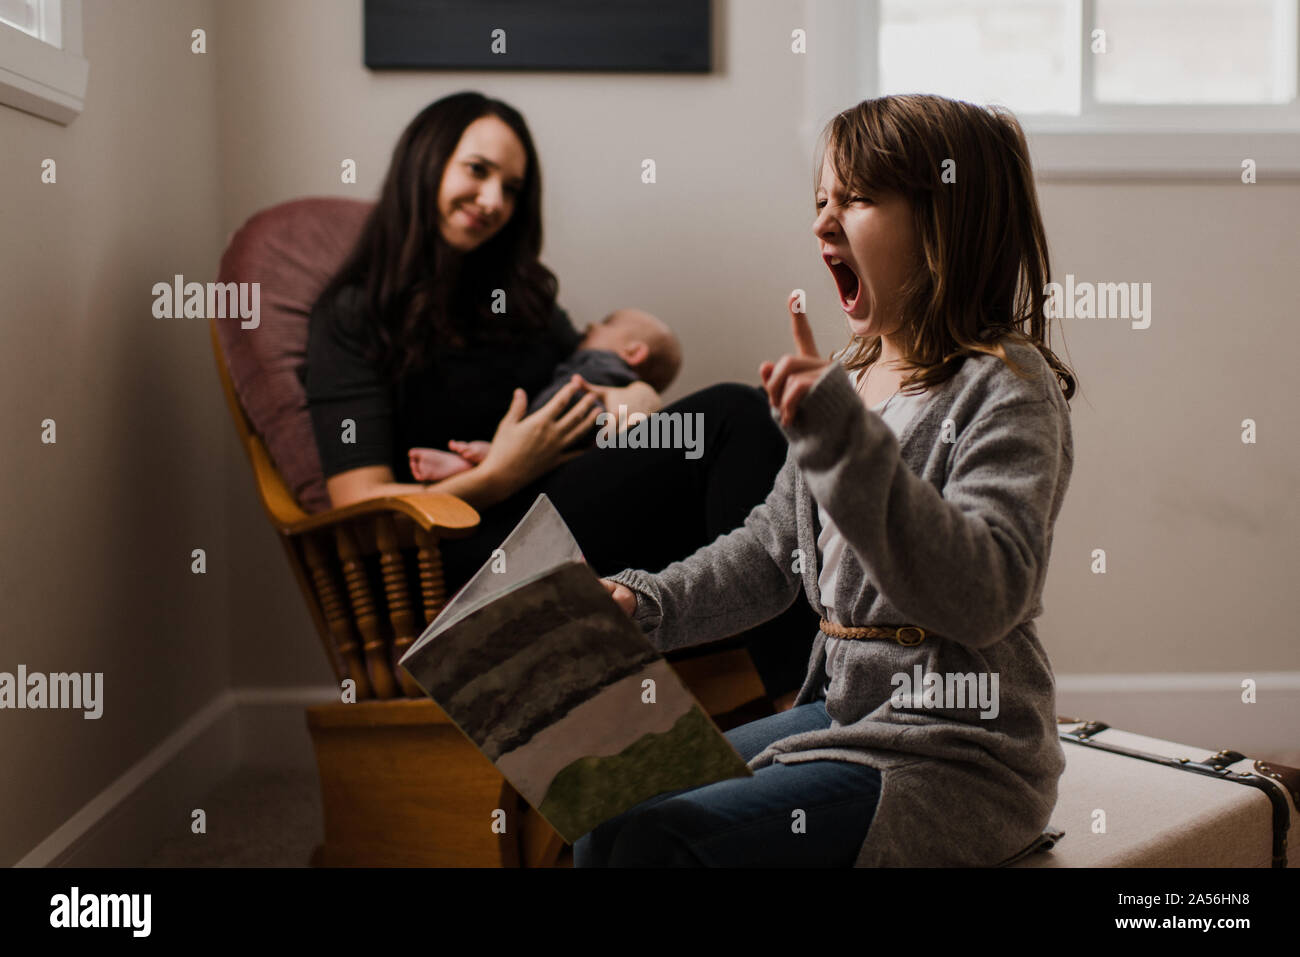 Girl with book pulling faces, while mother cradles baby brother in living room armchair Stock Photo